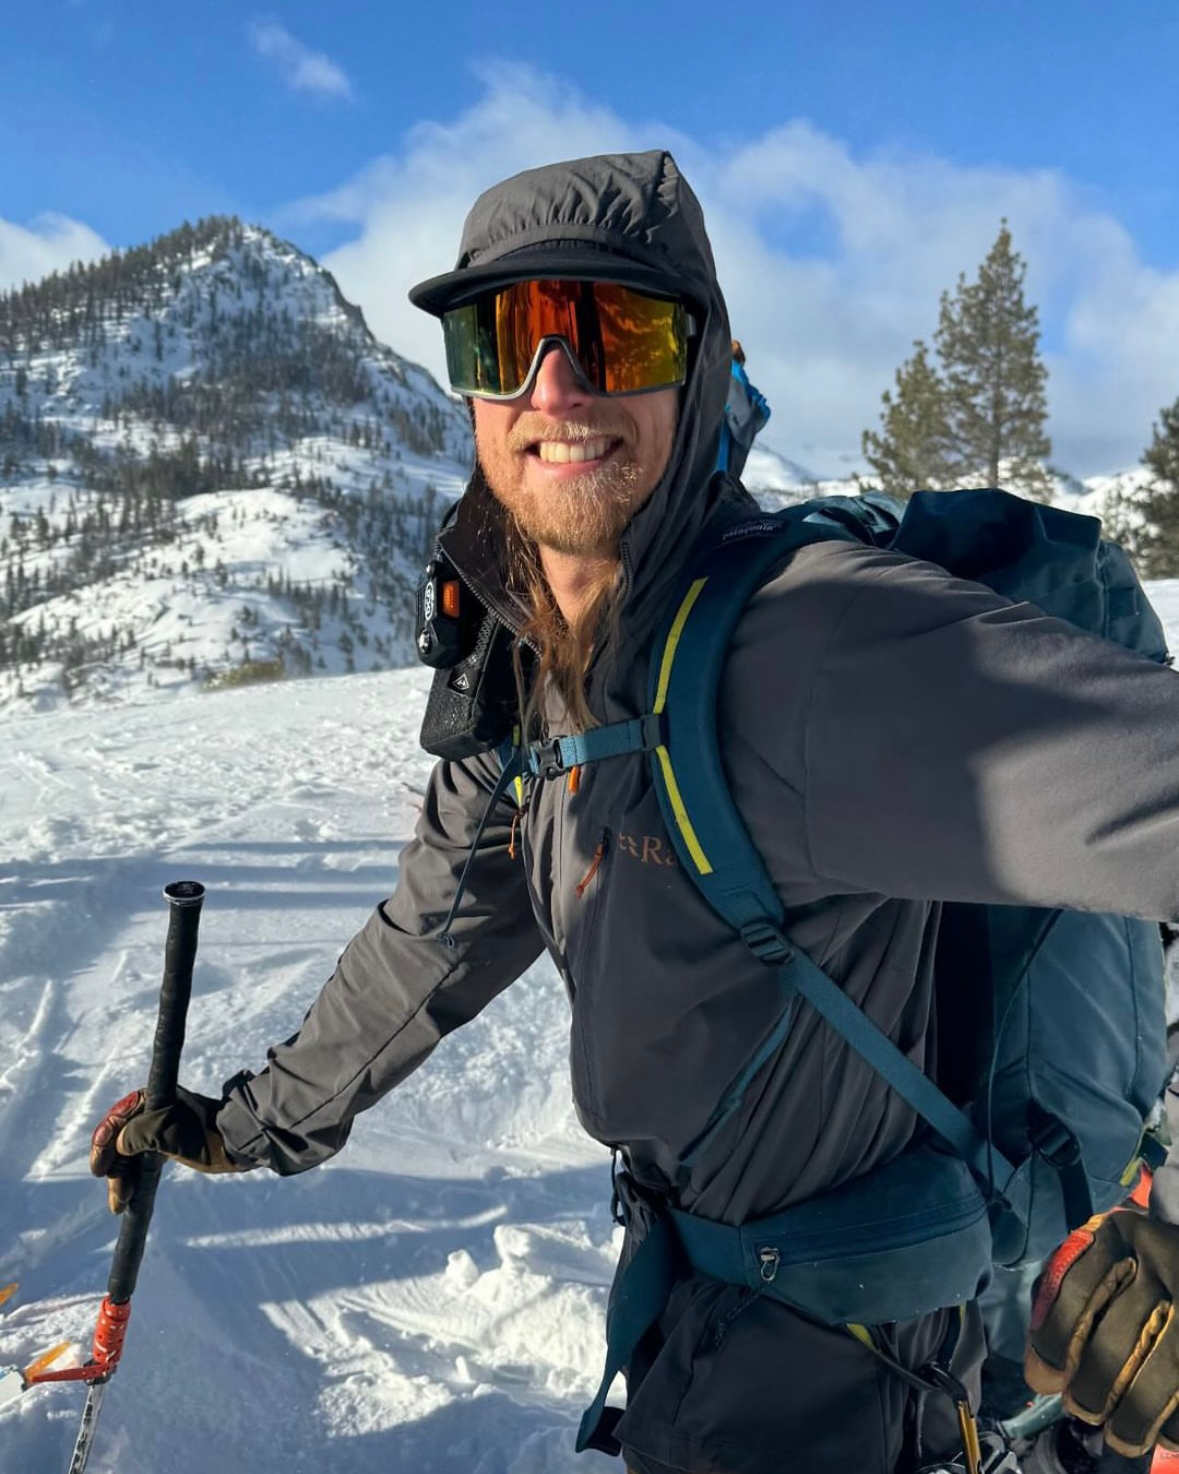 A skier wears a softshell jacket while backcountry skiing